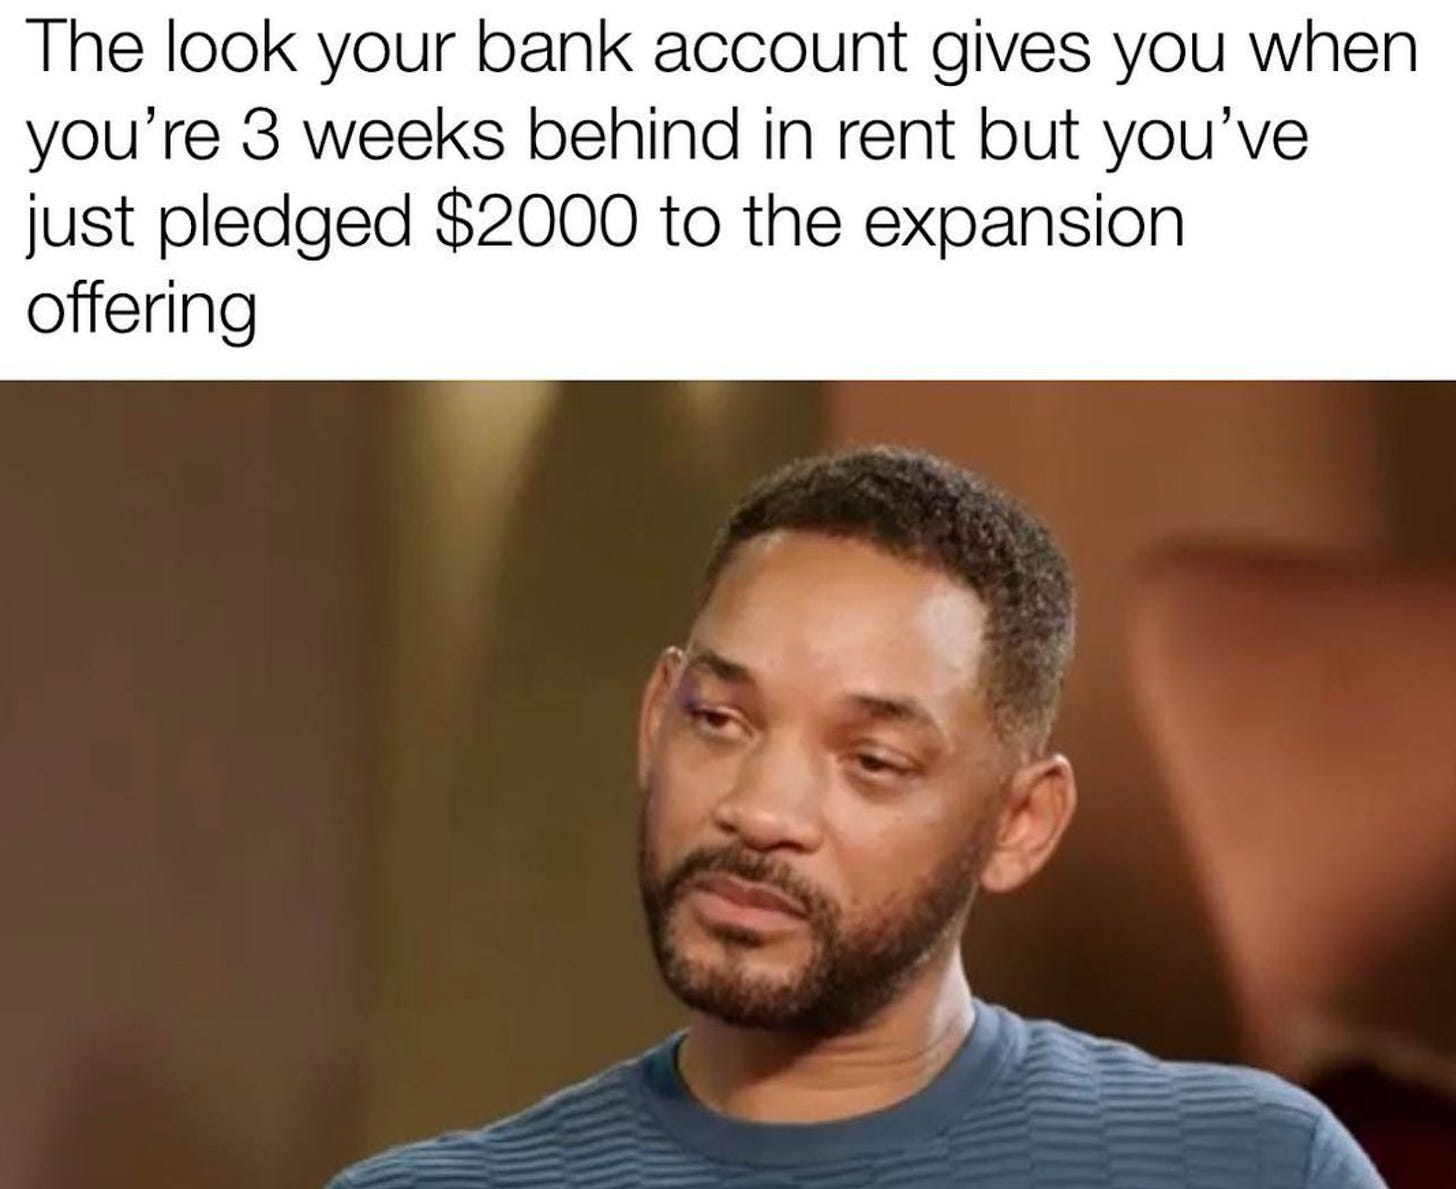 A meme showing Will Smith giving a low key angry look, with the caption “The look your bank account gives you when you’re 3 weeks behind in rent but you’ve just pledged $2000 to the expansion offering”